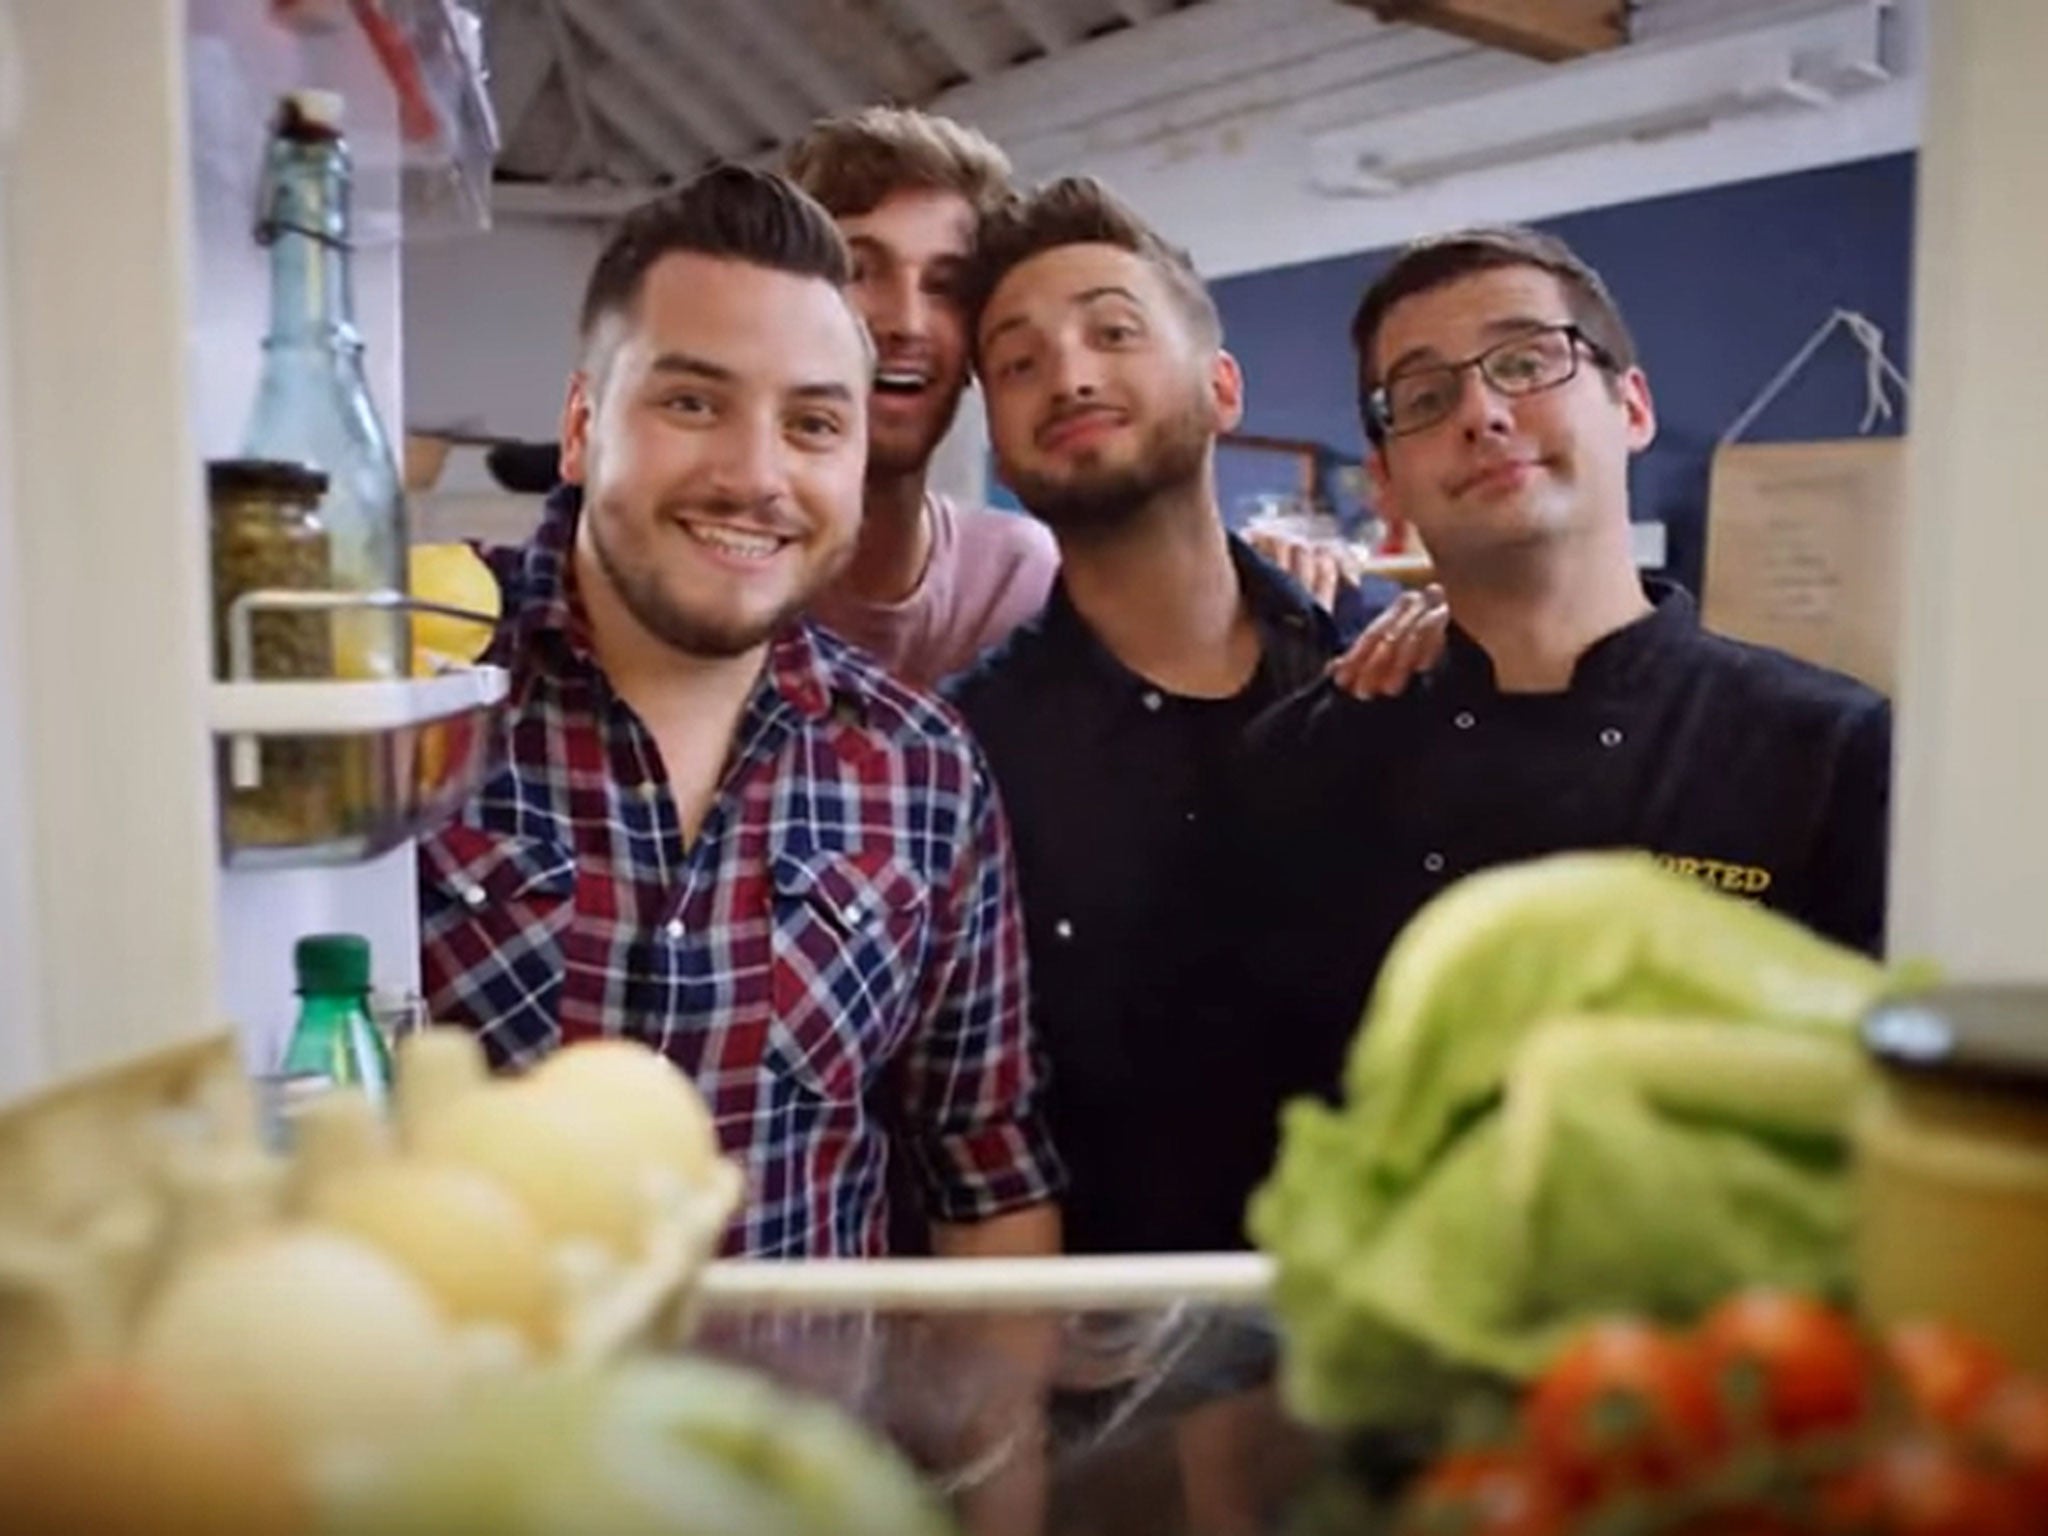 The team that turned Sorted Food into Europe’s biggest online cookery channel